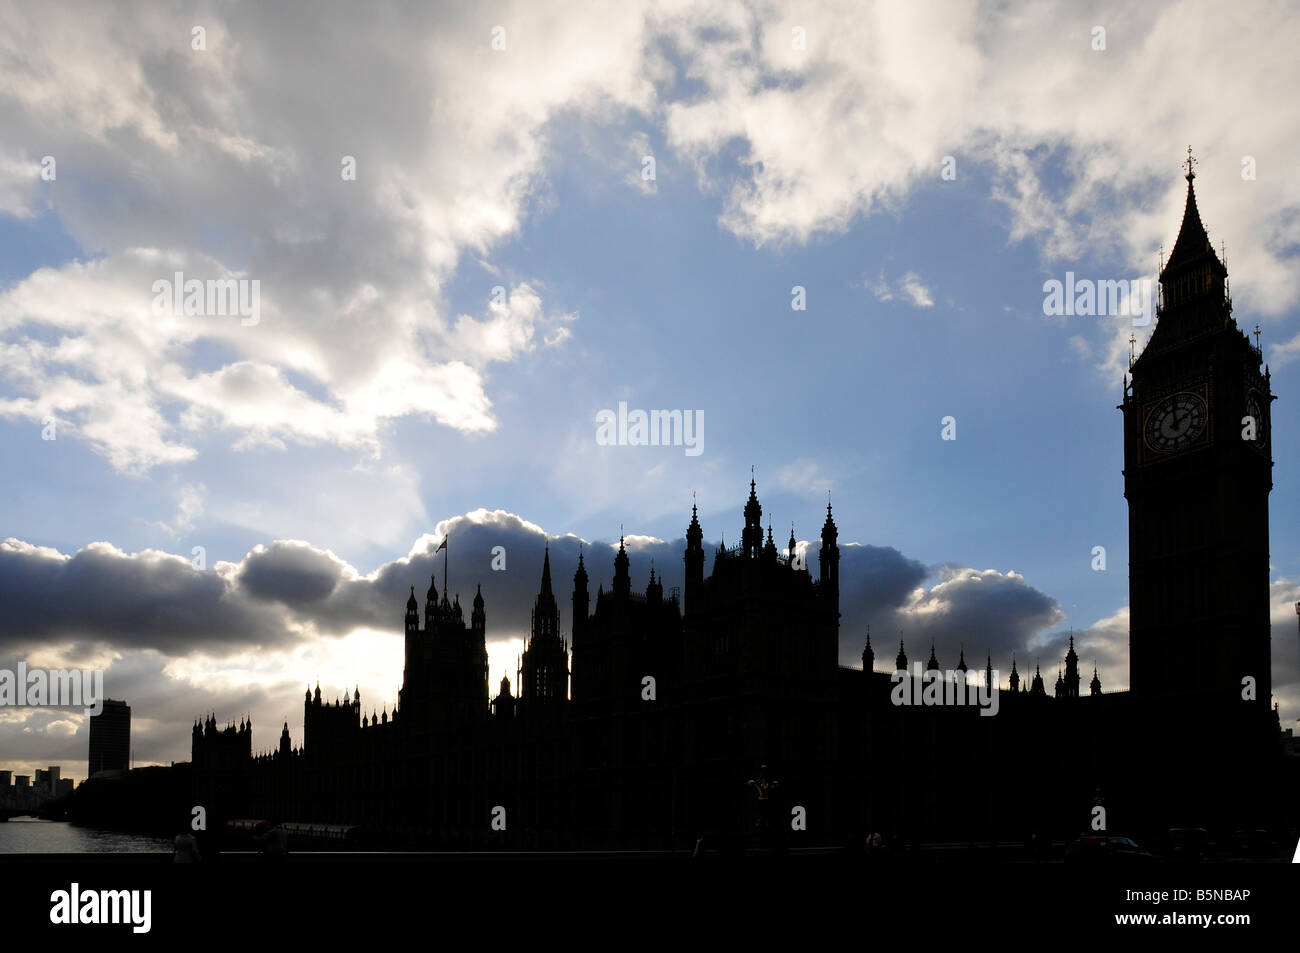 Houses of Parliament / Big Ben / Westminster Bridge in silhouette, London, United Kingdom. Picture by Patrick Steel patricksteel Stock Photo